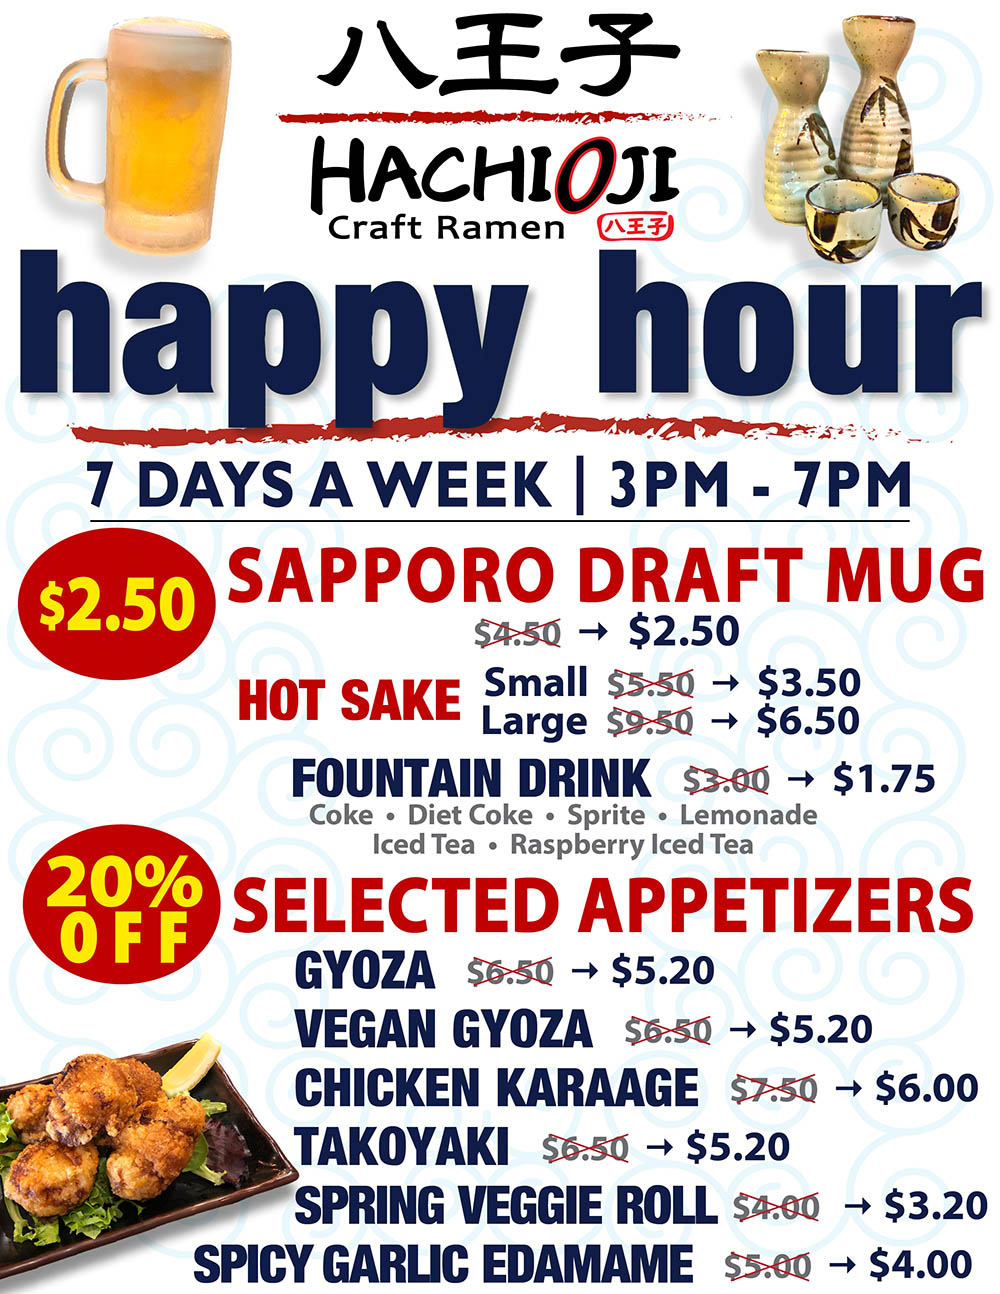 Happy Hour - 7 Days a week - 3pm to 7pm